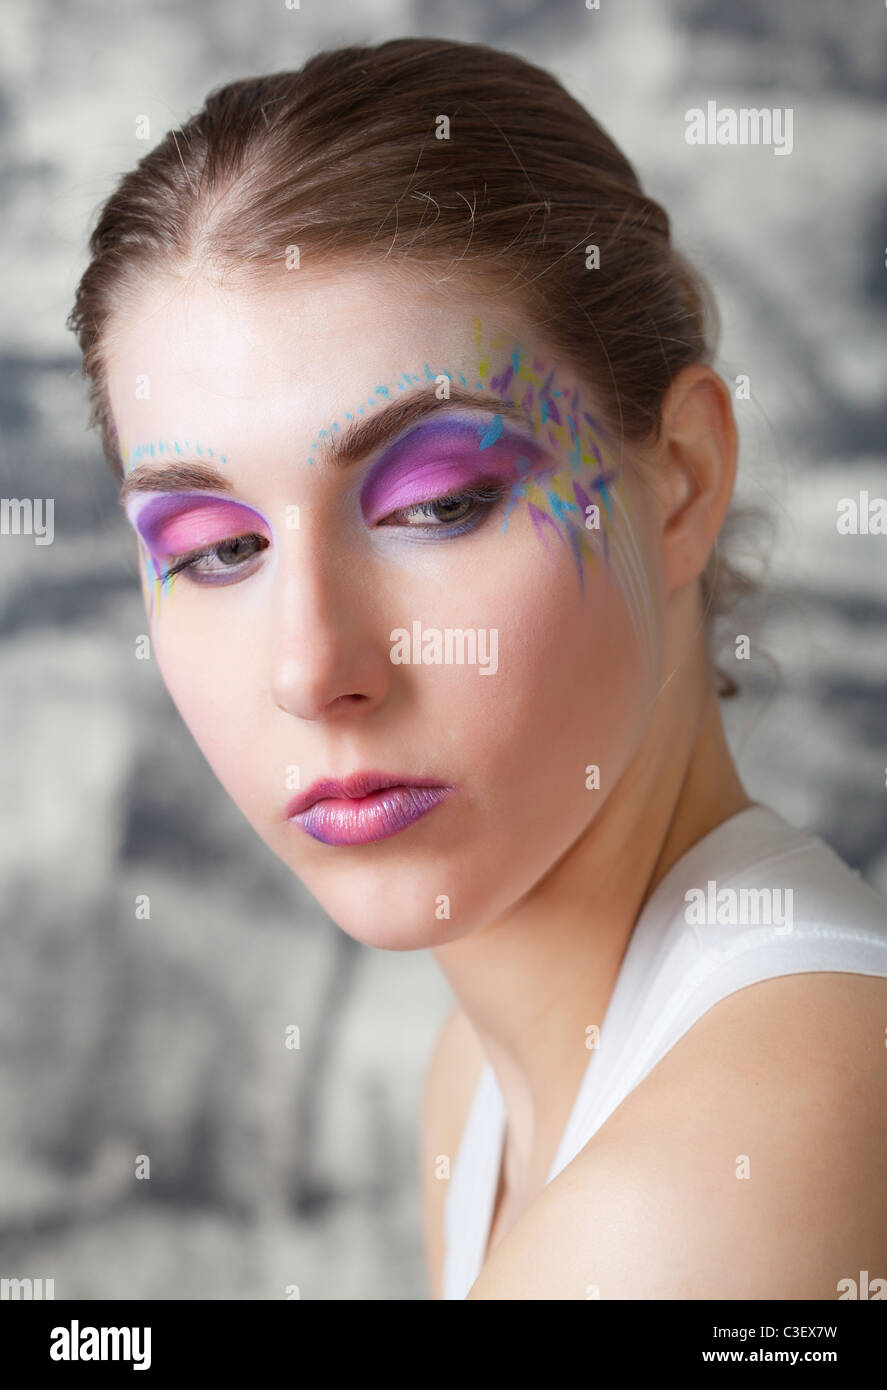 portrait of a pretty young woman with face art Stock Photo